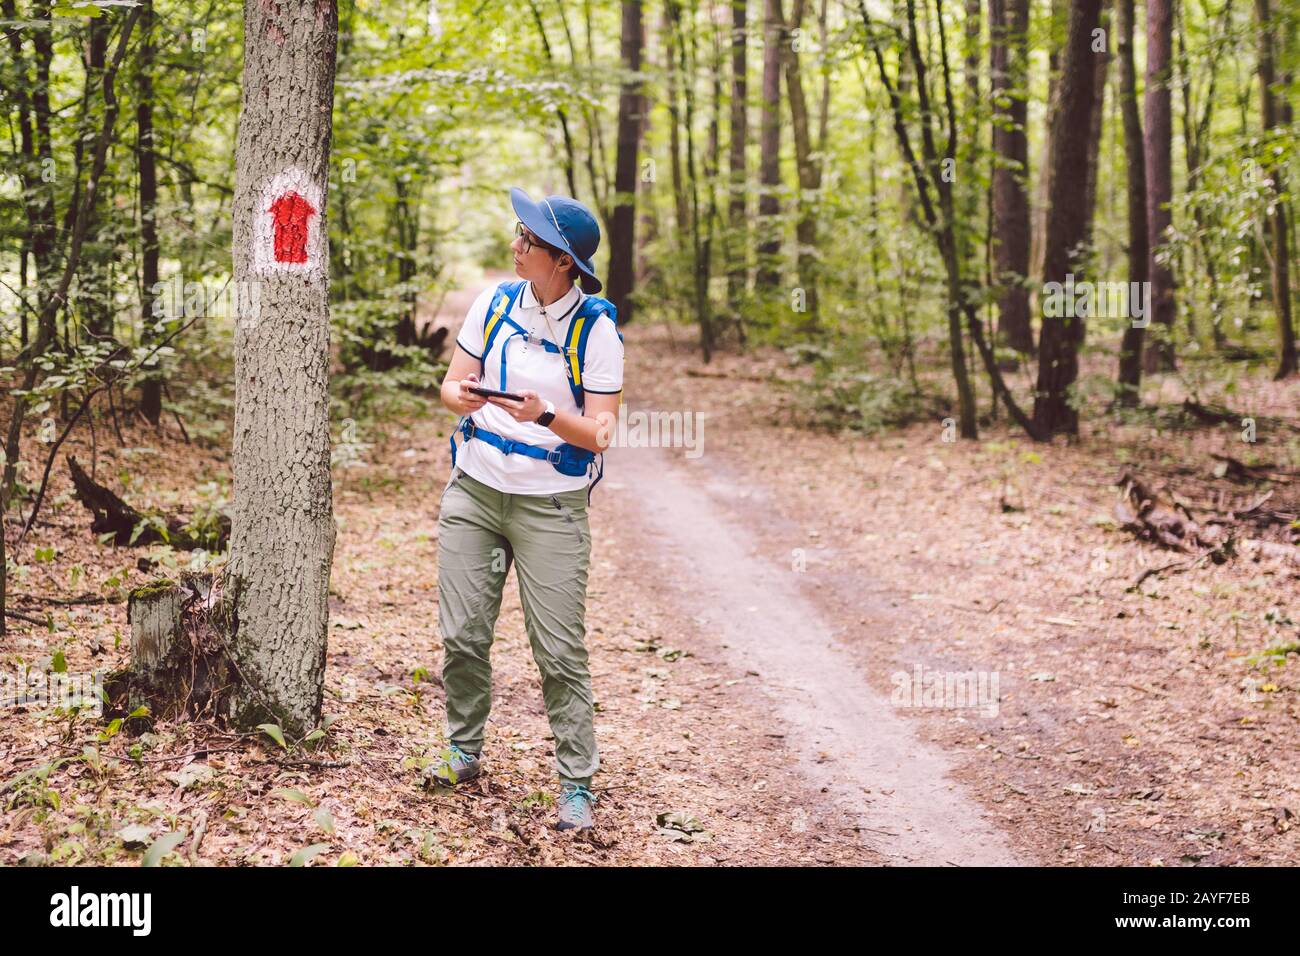 Hiking marked trail in the forest. Marking the tourist route painted on the tree. Touristic route sign. Travel route sign. Touri Stock Photo